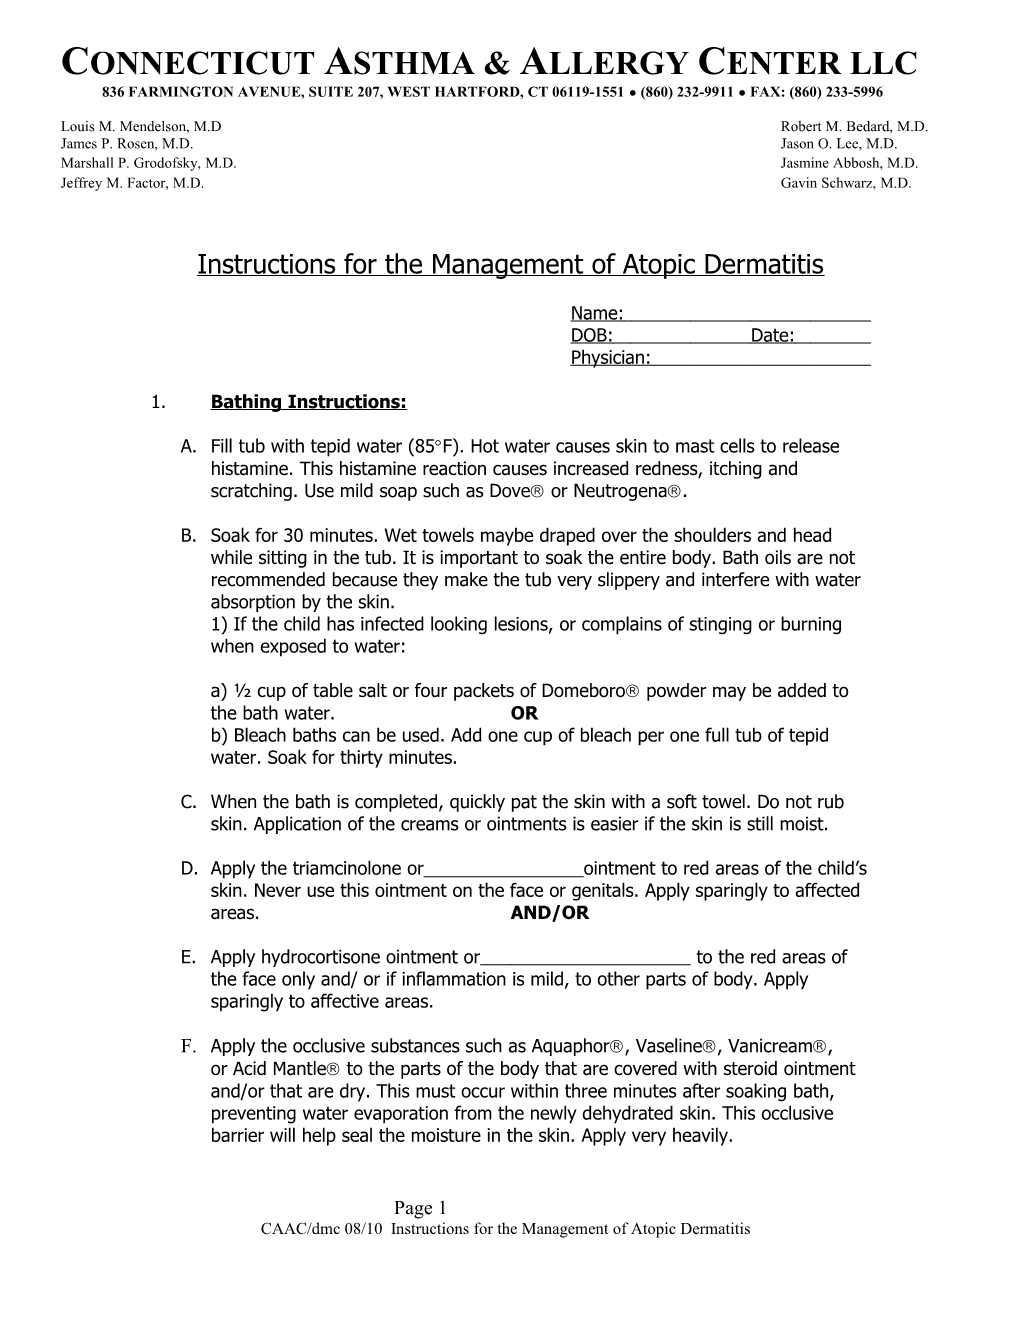 Instructions for Management of Atopic Dermatitis